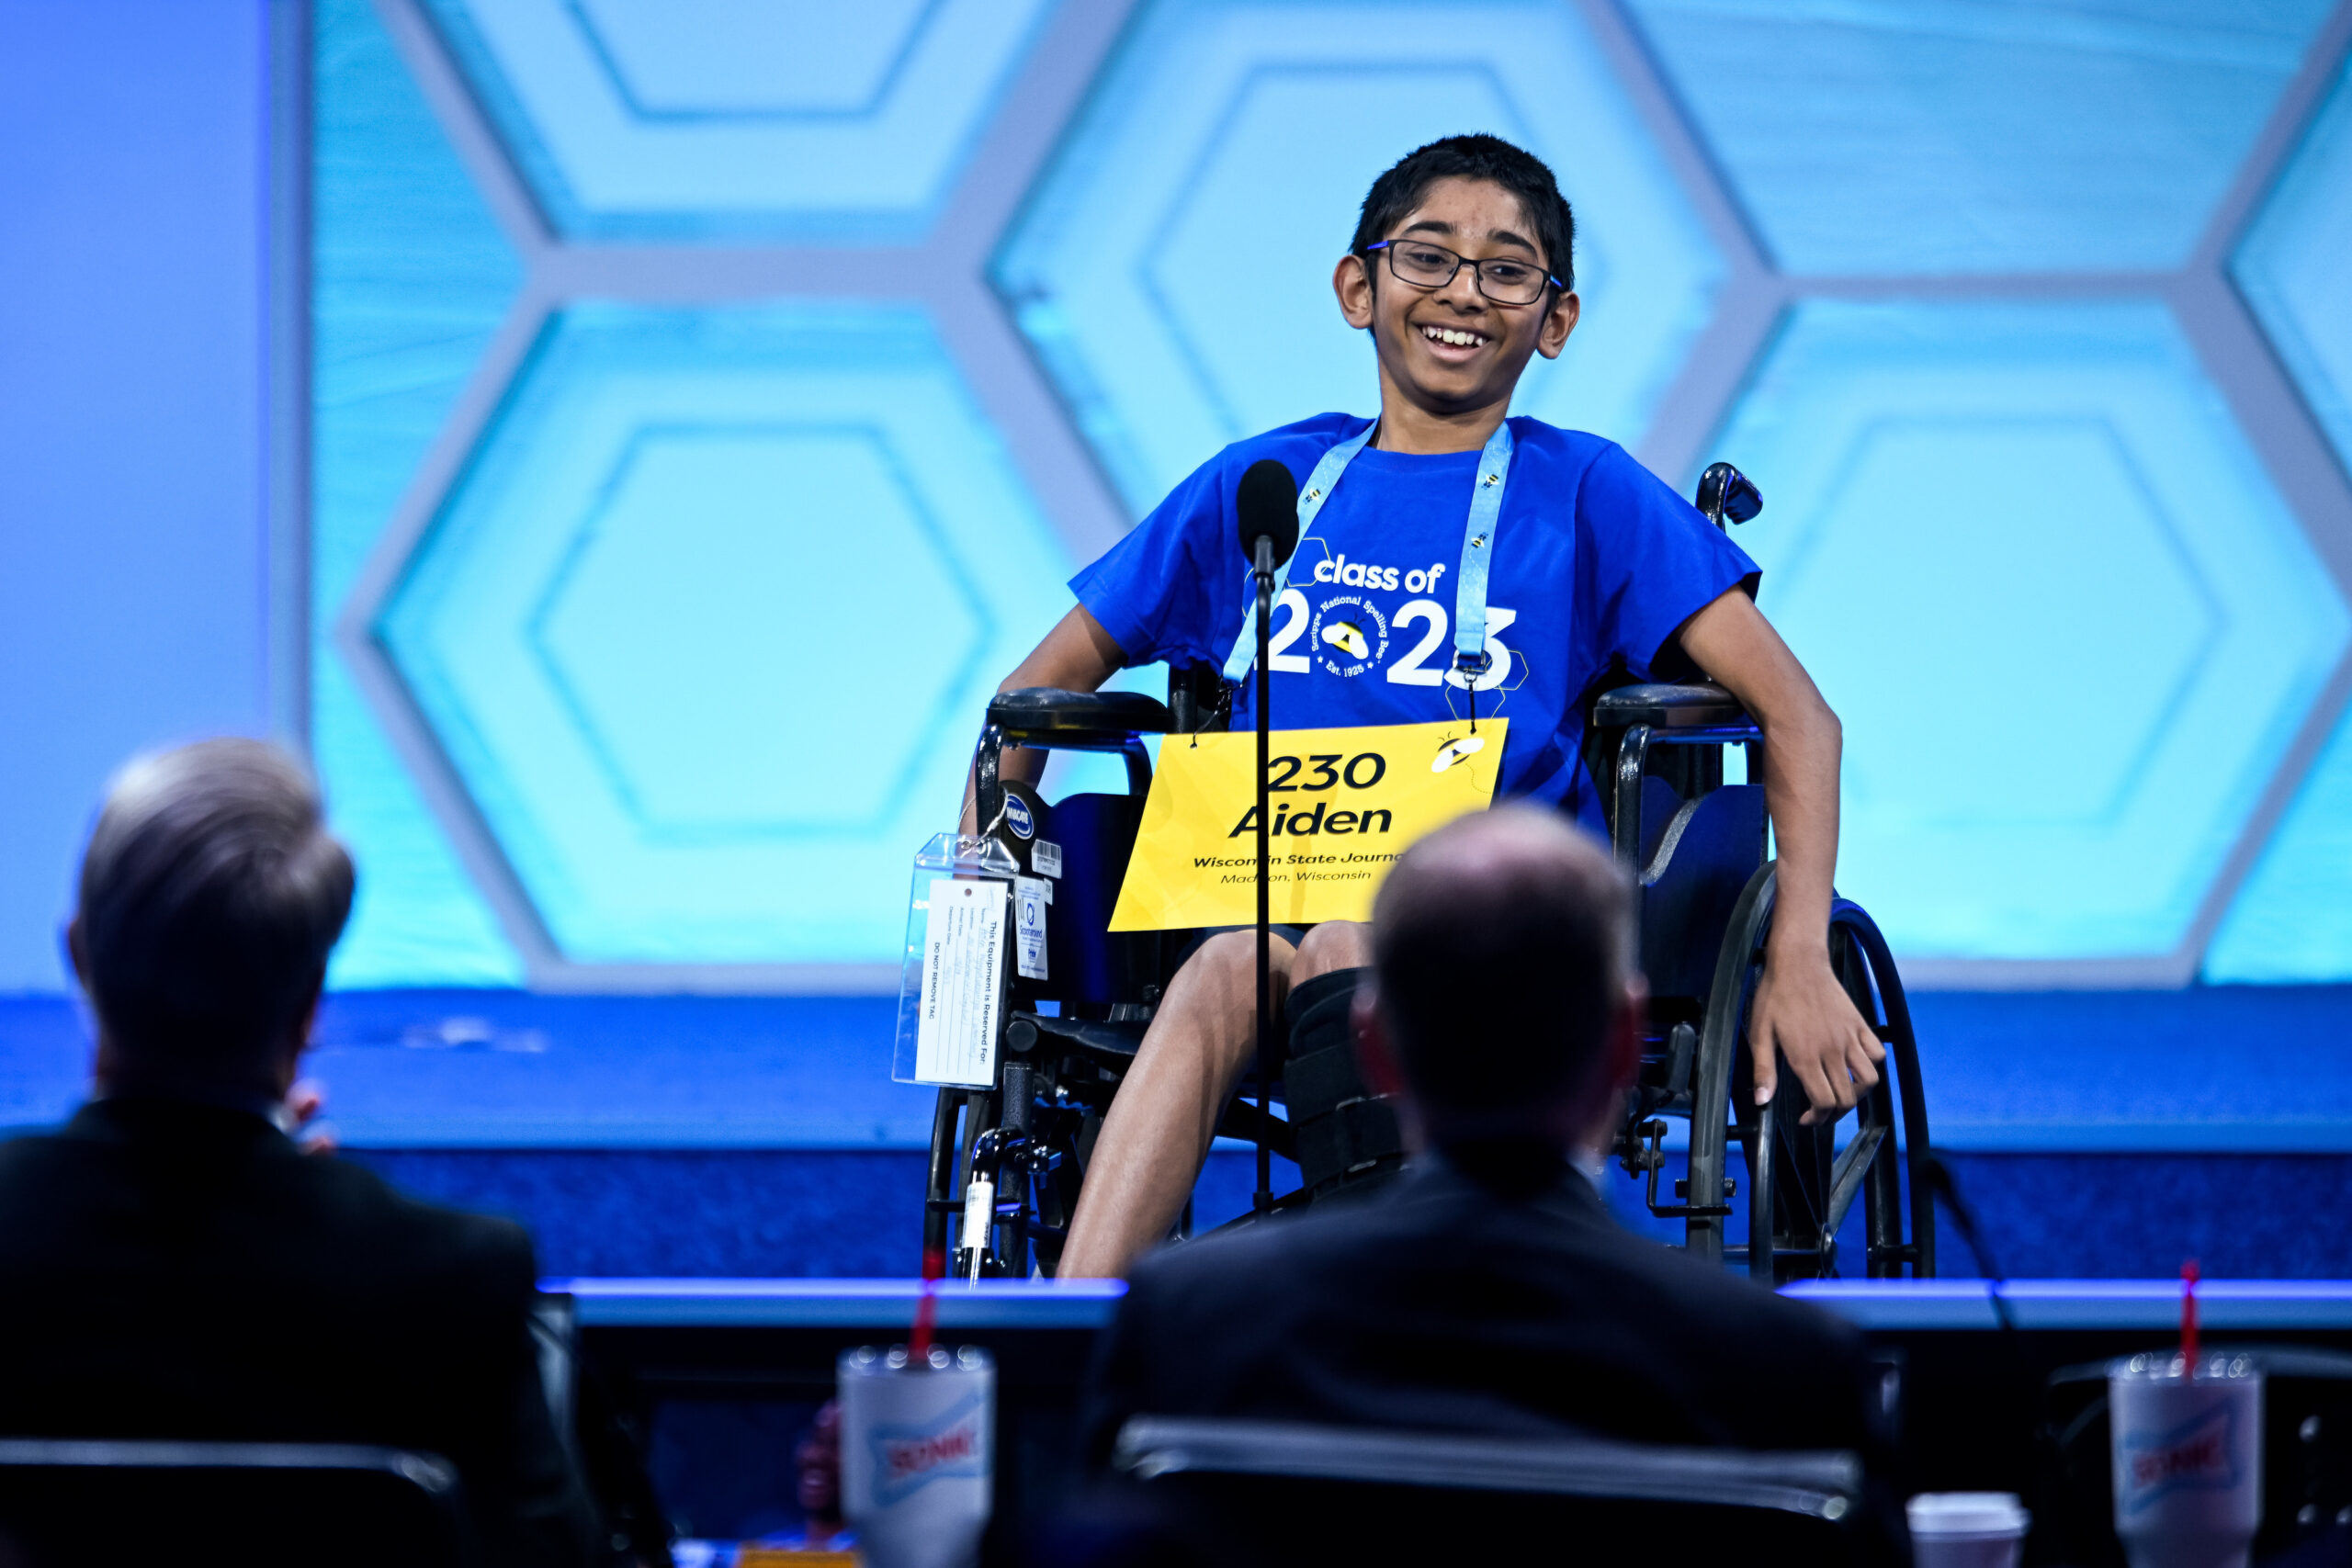 Wisconsin seventh grader makes it to National Spelling Bee semifinals